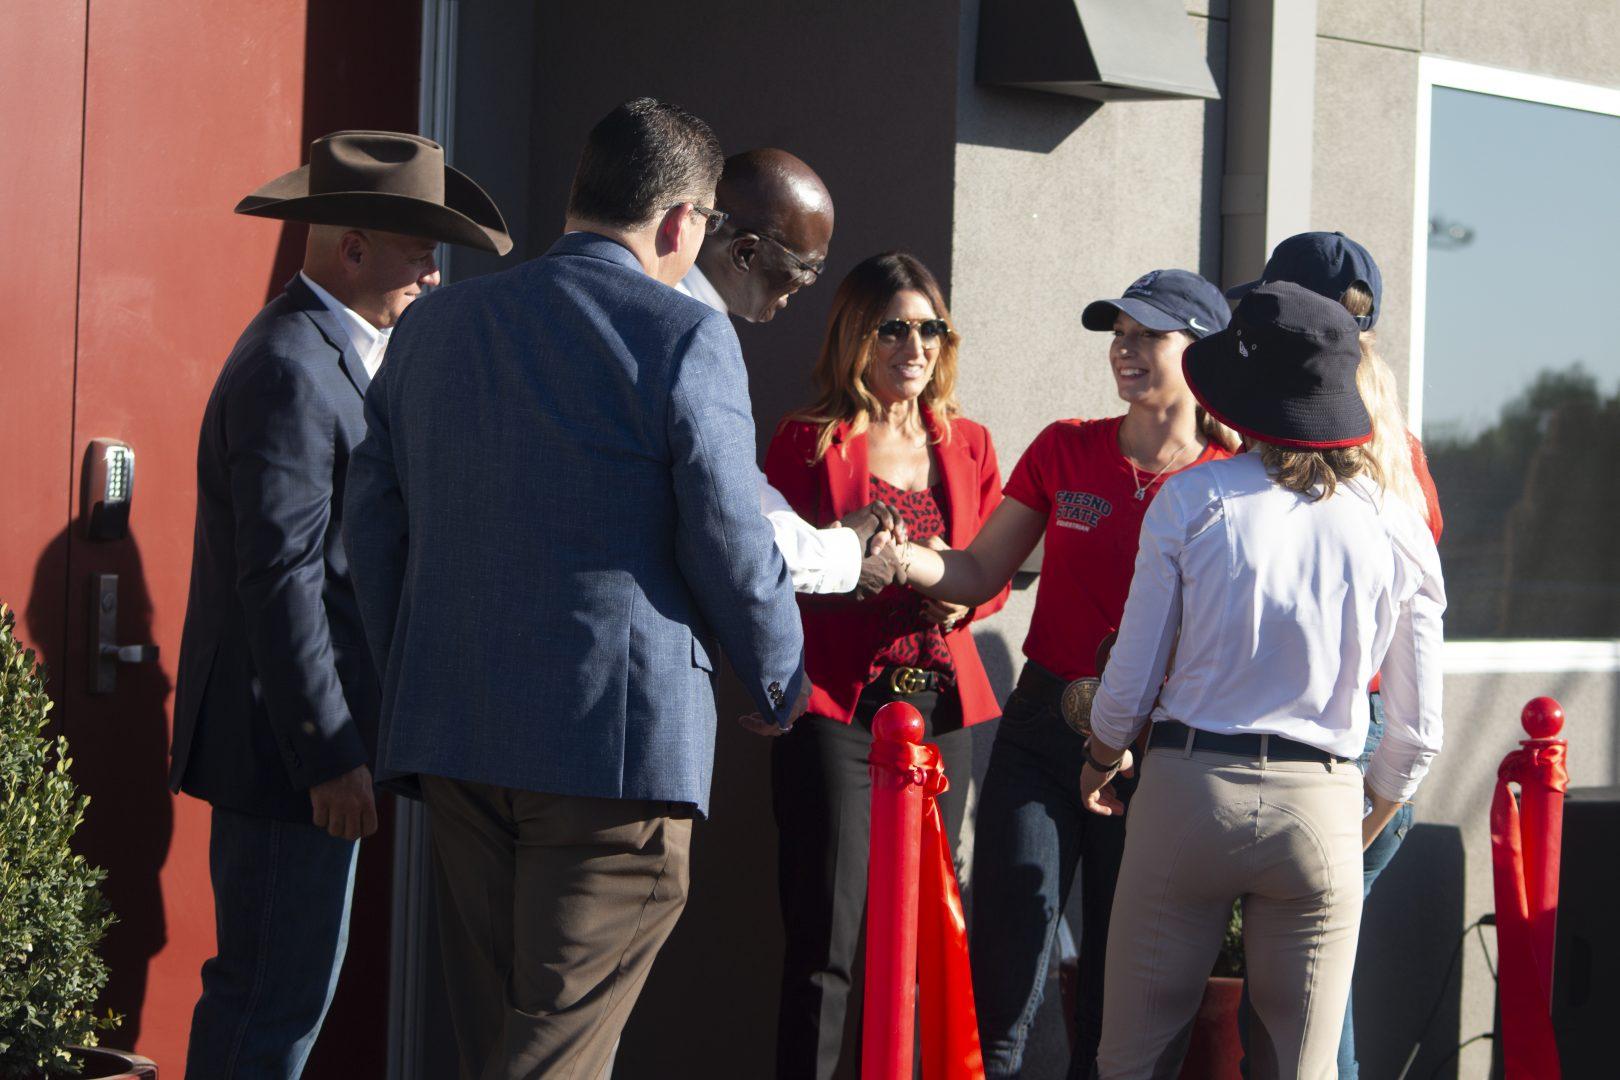 Fresno State equestrian team captains shake hands with the Director of Athletics Terry Tumey and University President Doctor Joseph I. Castro after the cutting of the ribbon for their new Equestrian Center grand opening at the Student Horse Center on Friday, Oct. 25, 2019.